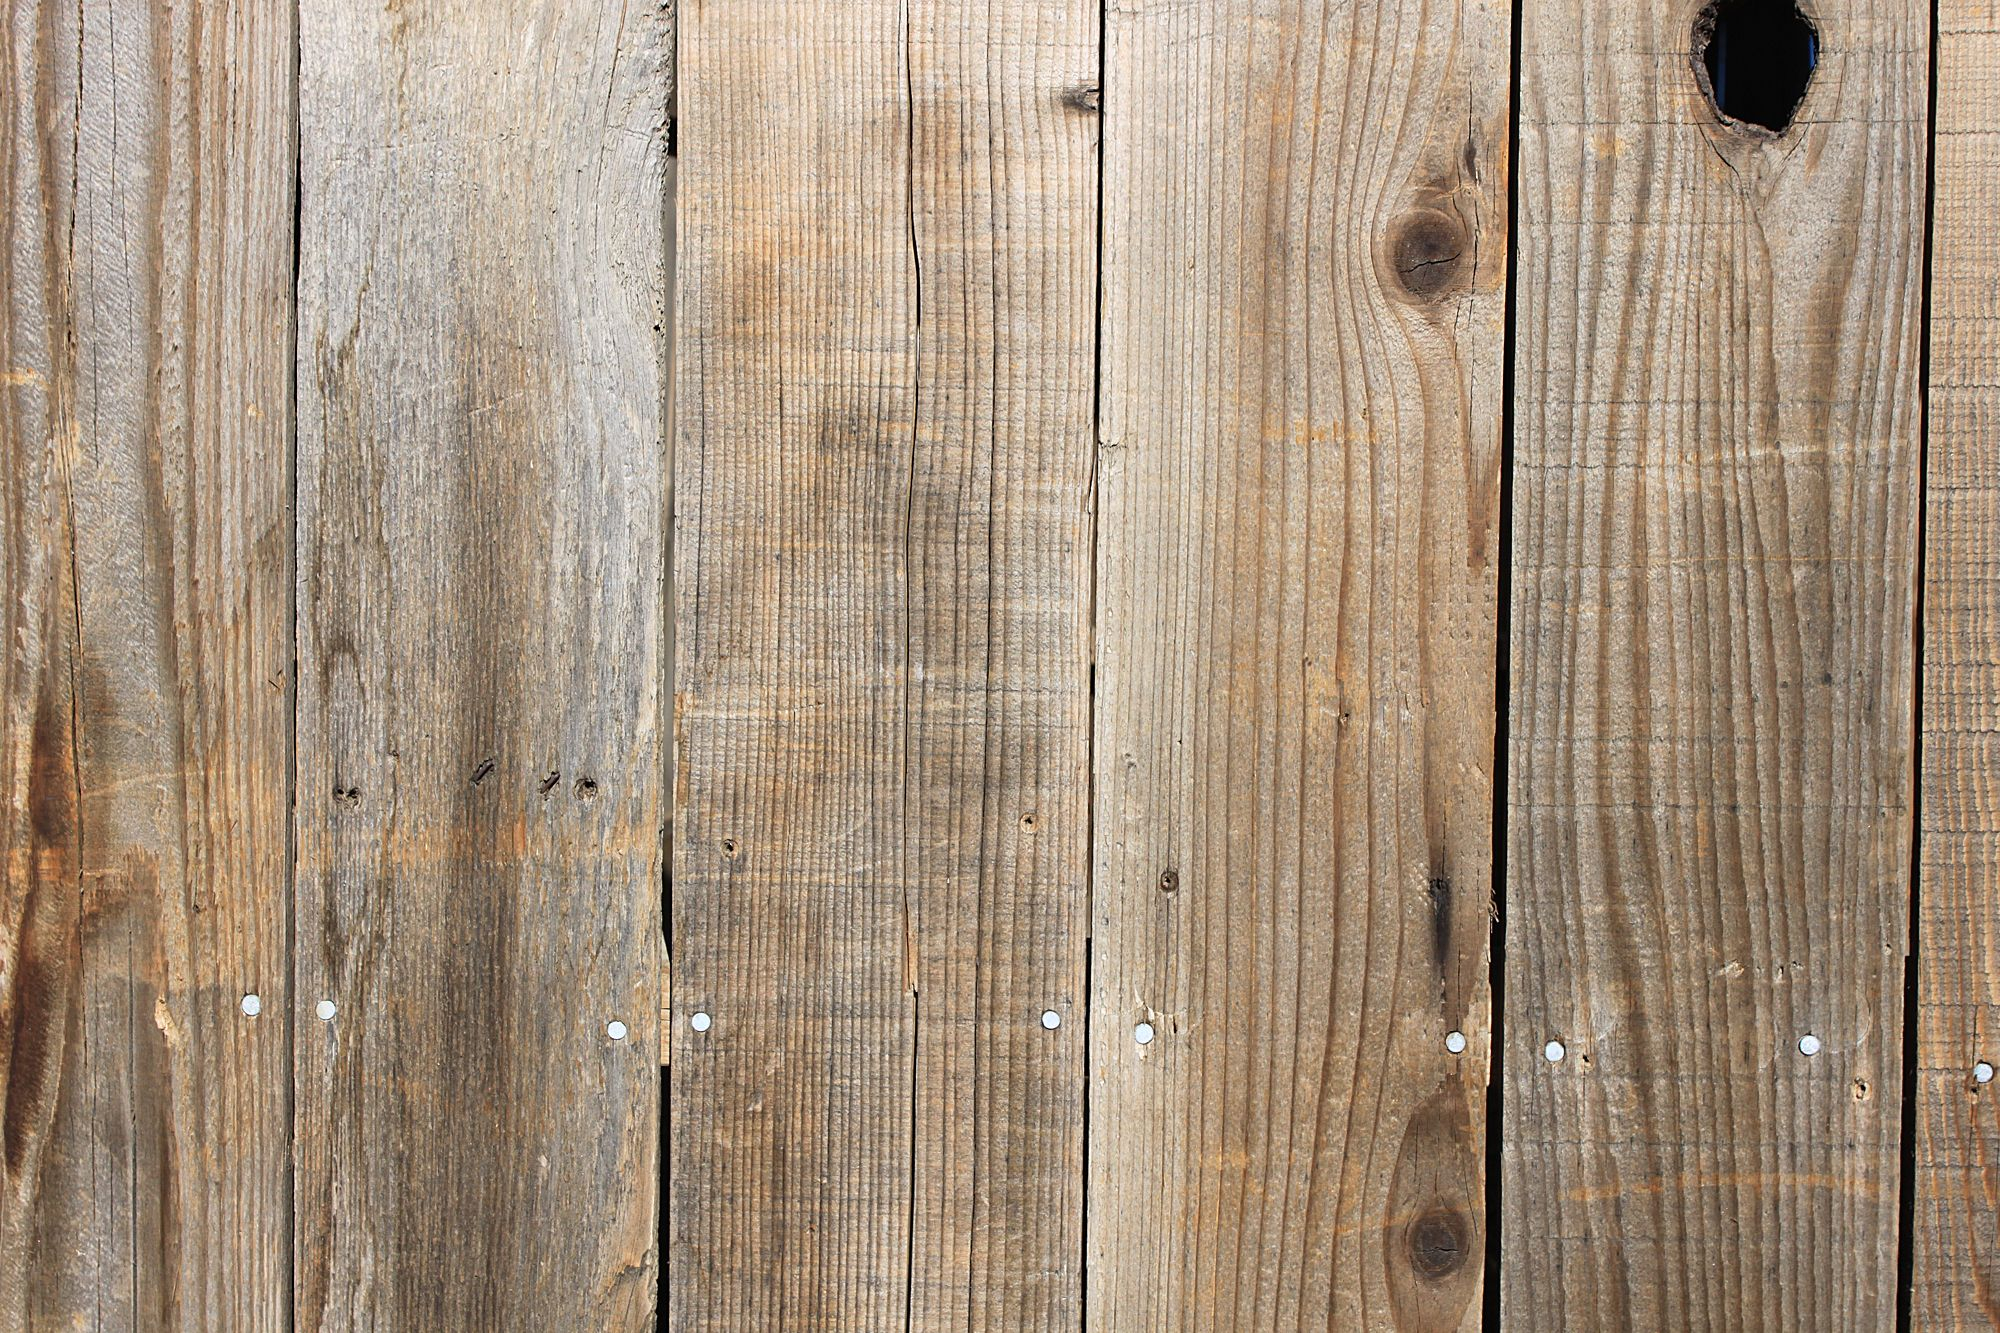 2000x1333 Totally FREE High Res Rustic Wooden Textures and Graphic Elements | Rustic wood wallpaper, Rustic wood background, Wooden textures